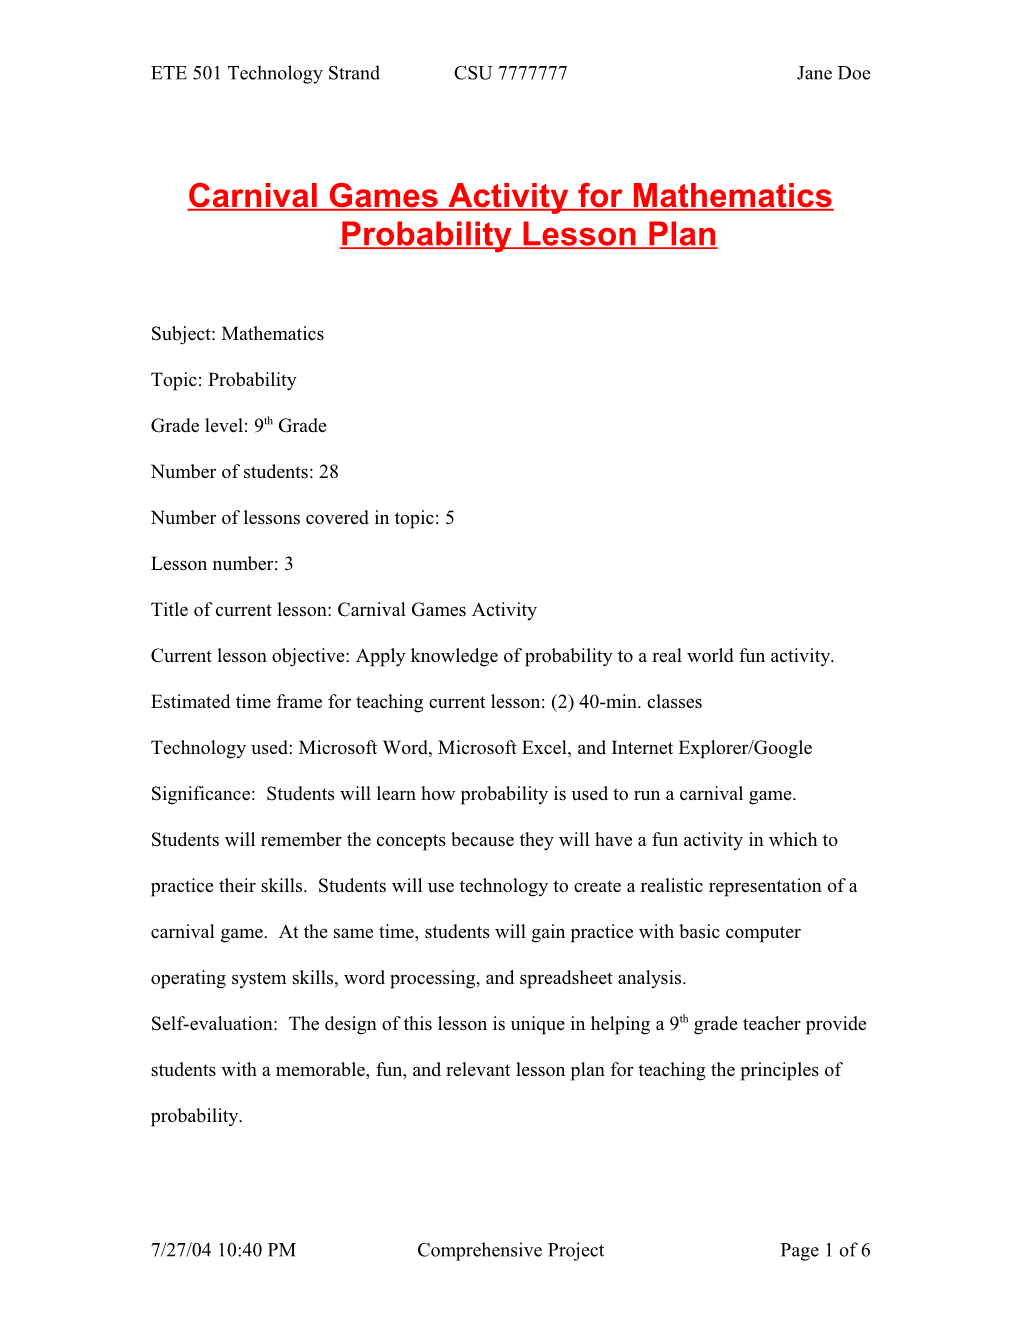 Carnival Games Activity for Mathematics Probability Lesson Plan